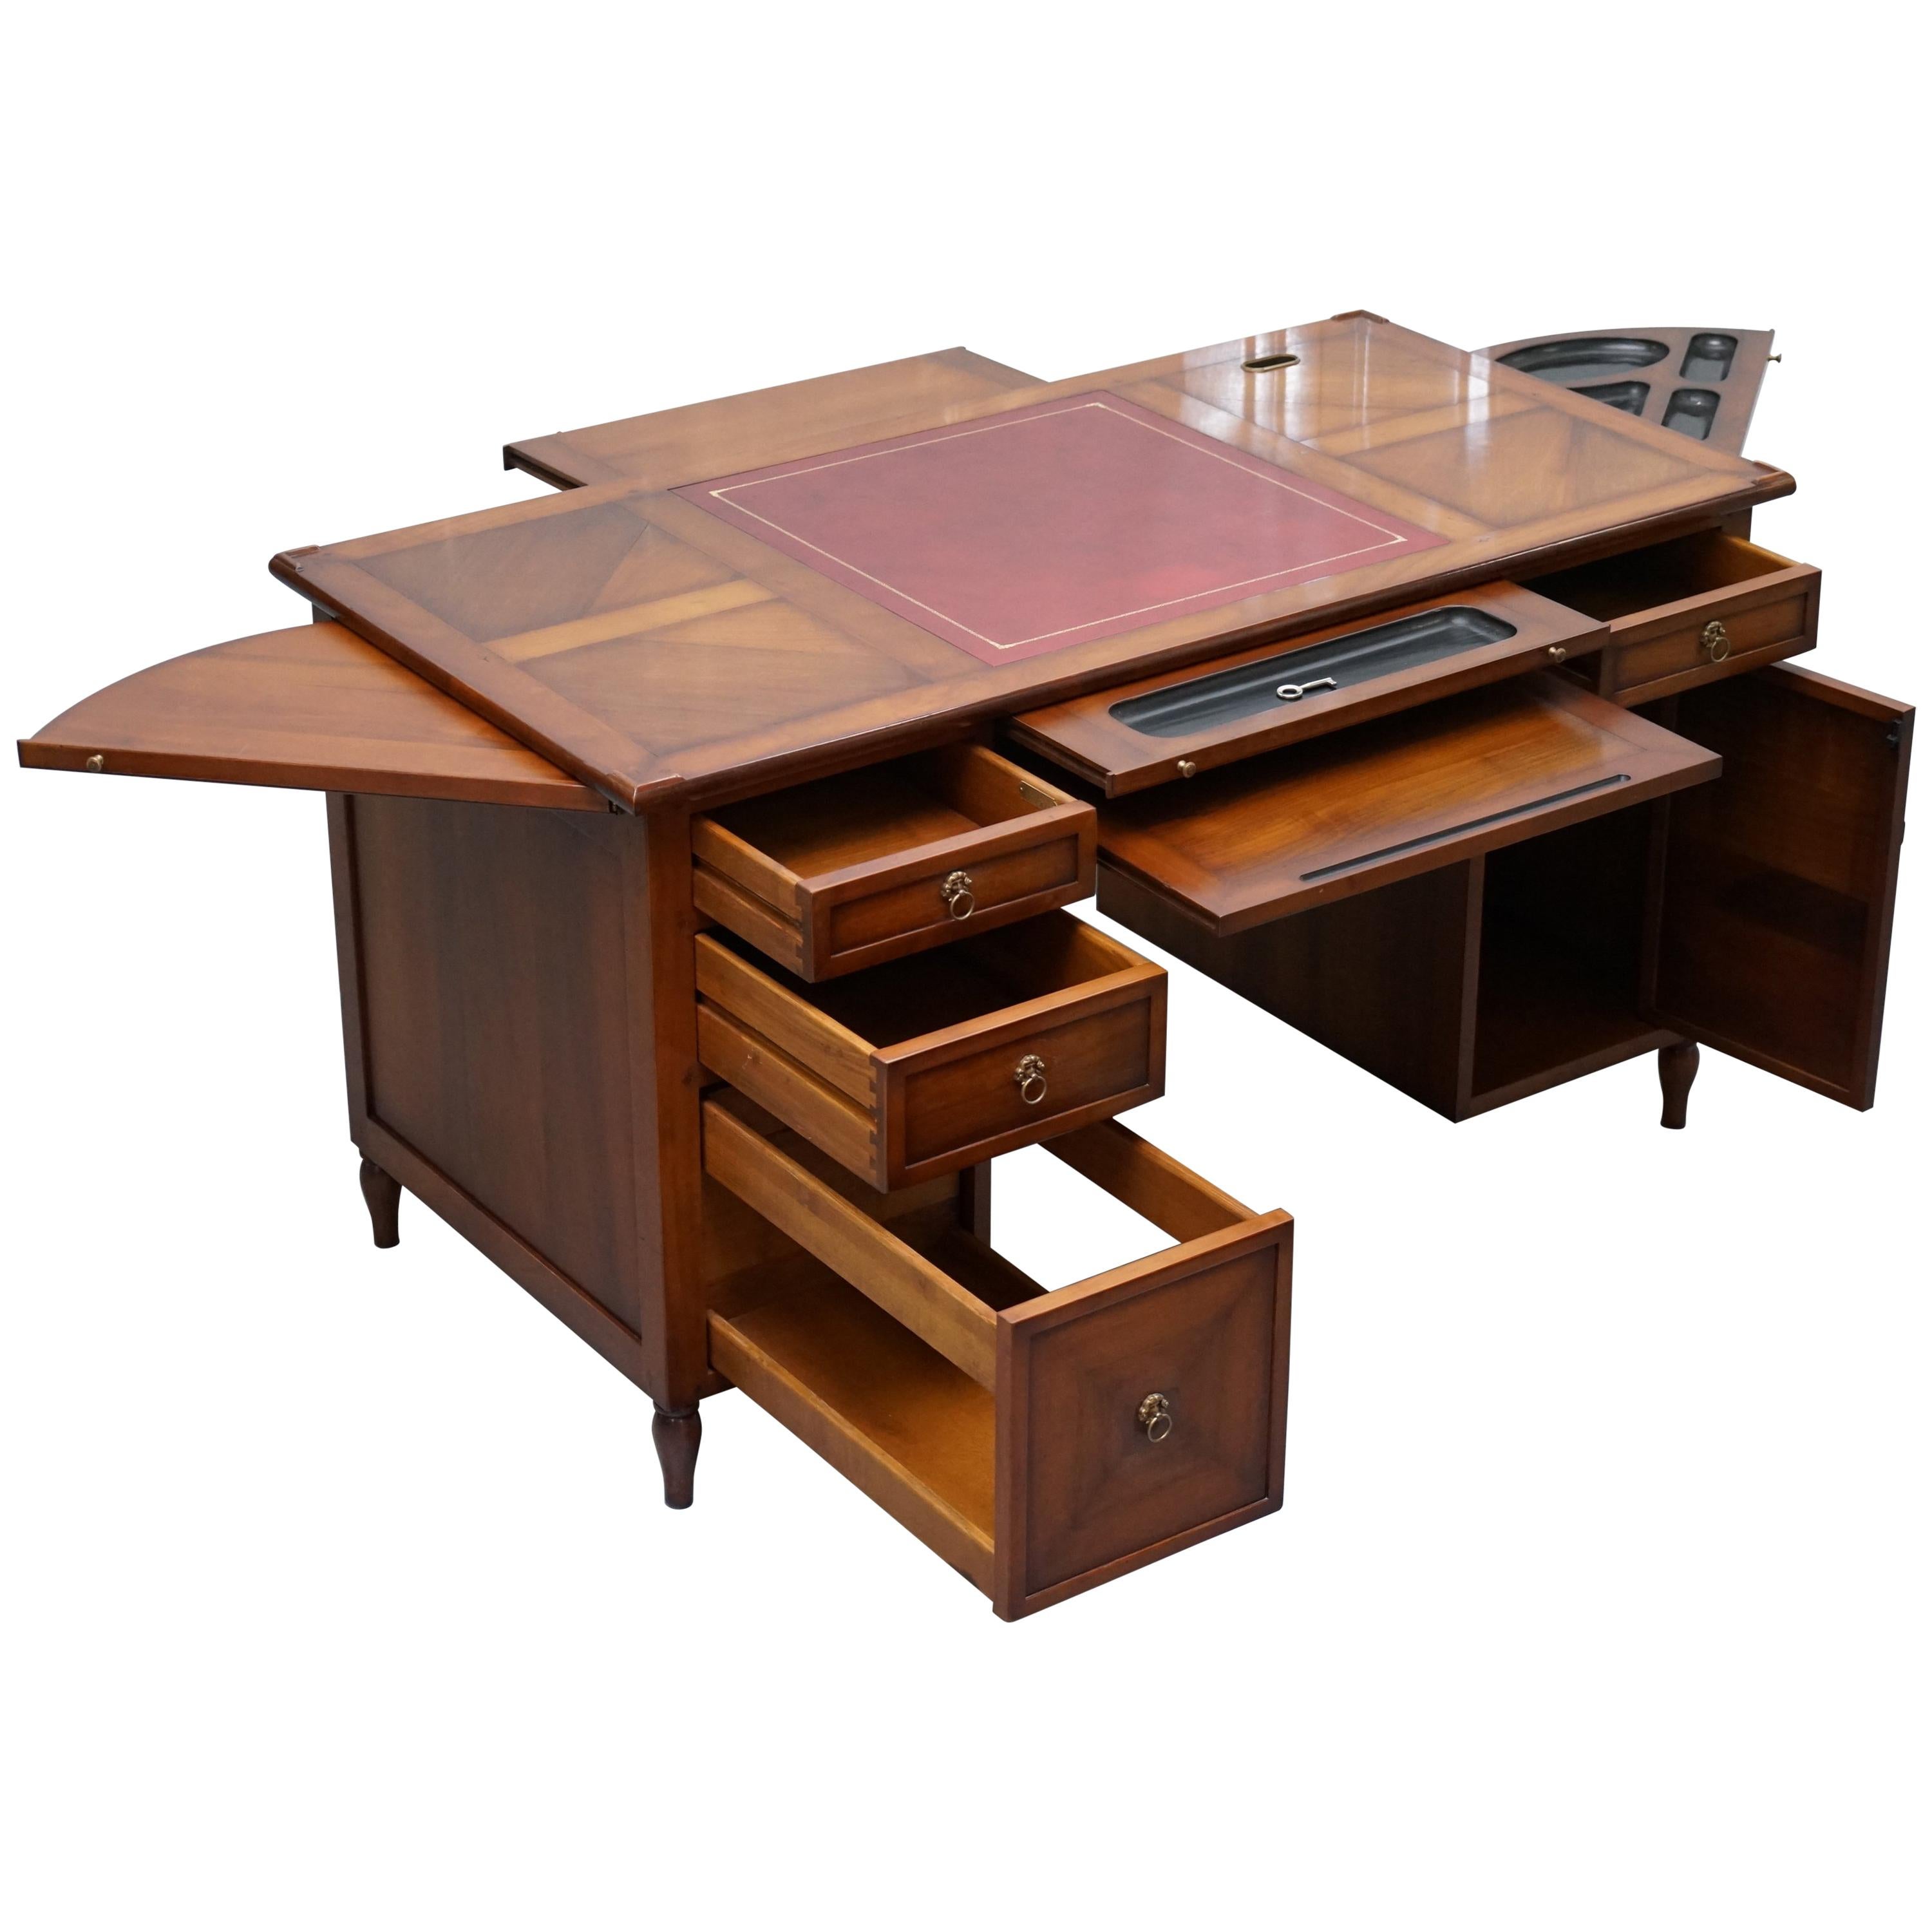 ASSI D'ASOLO ITALY CHERRY WOOD LEATHER DESK DESIGNED To HOUSE COMPUTER